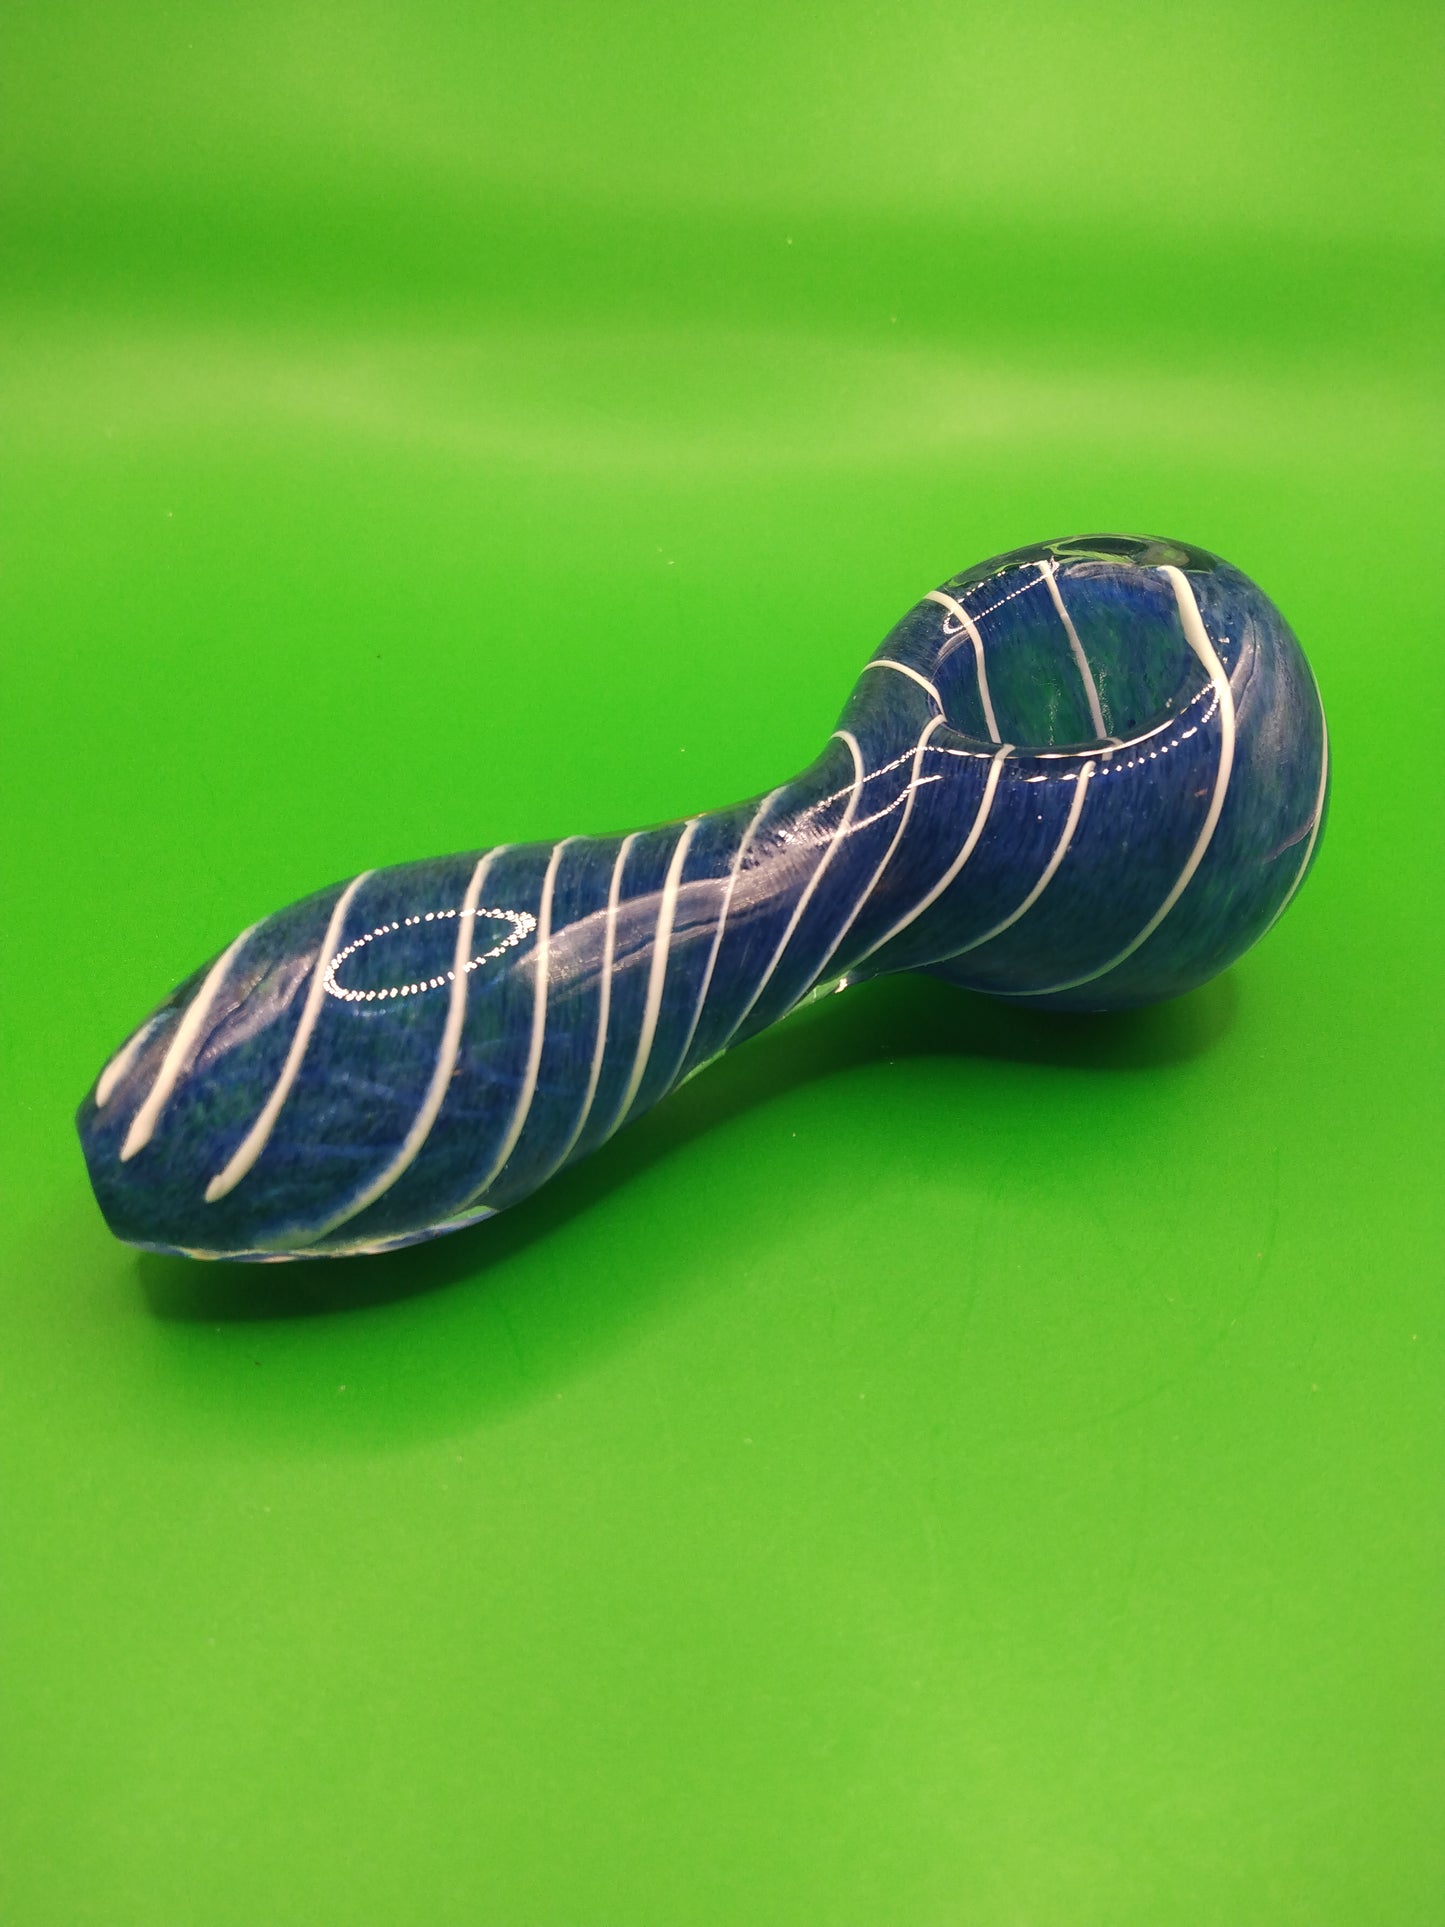 4" Blue and White Striped Glass Hand Pipe (Spoon)